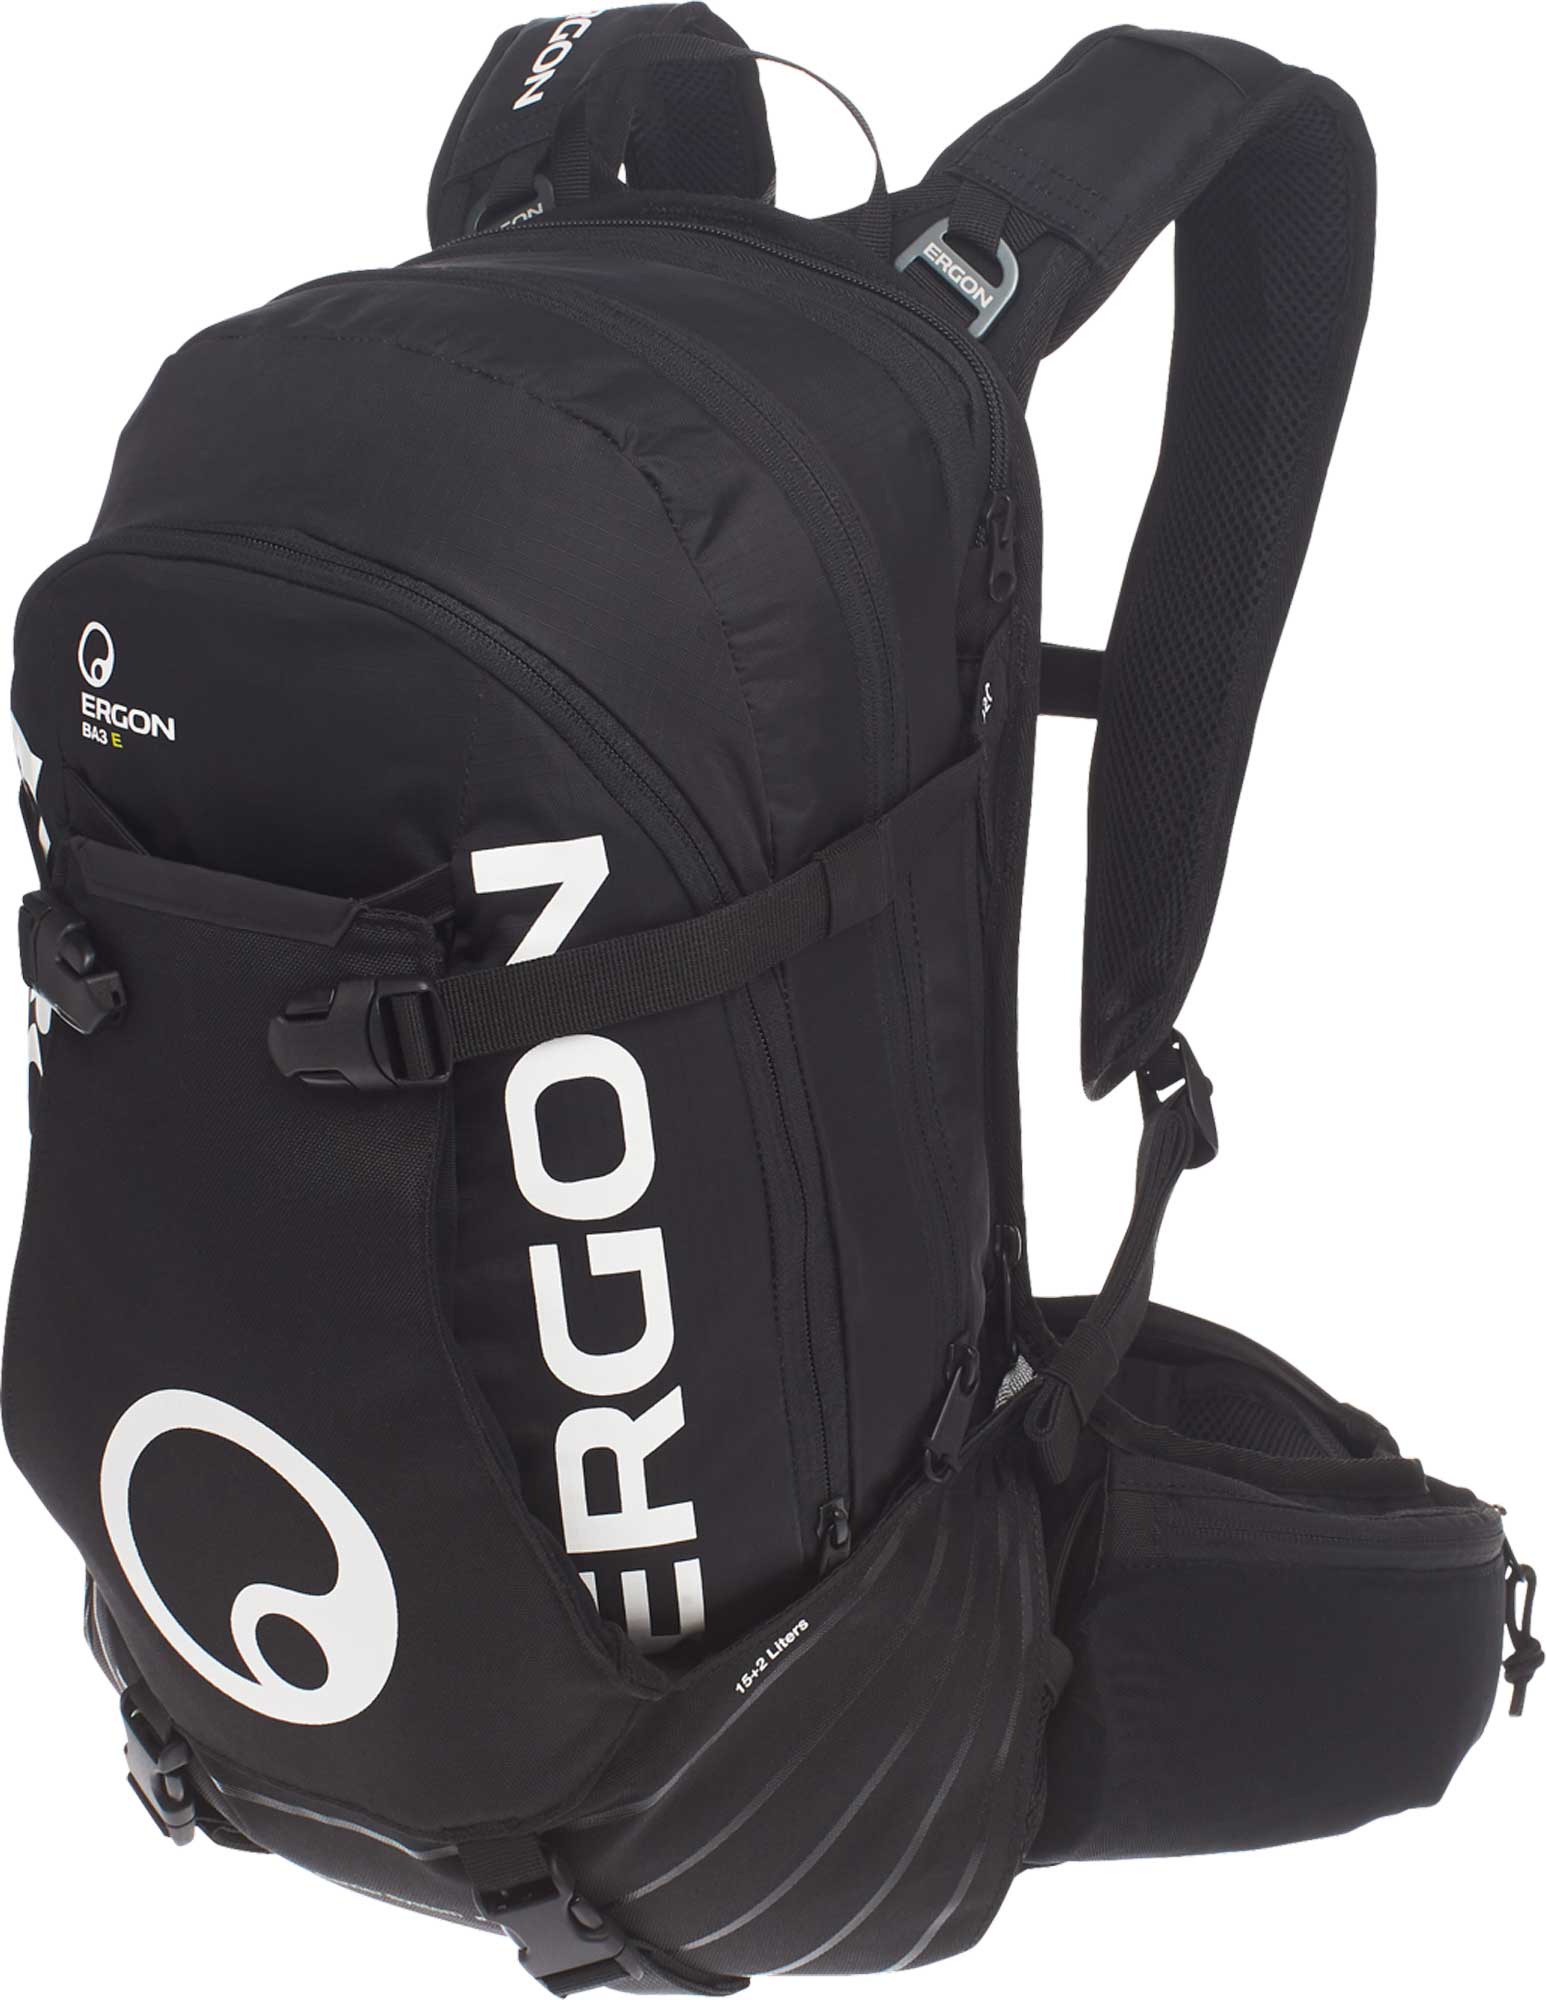 Cycling backpack